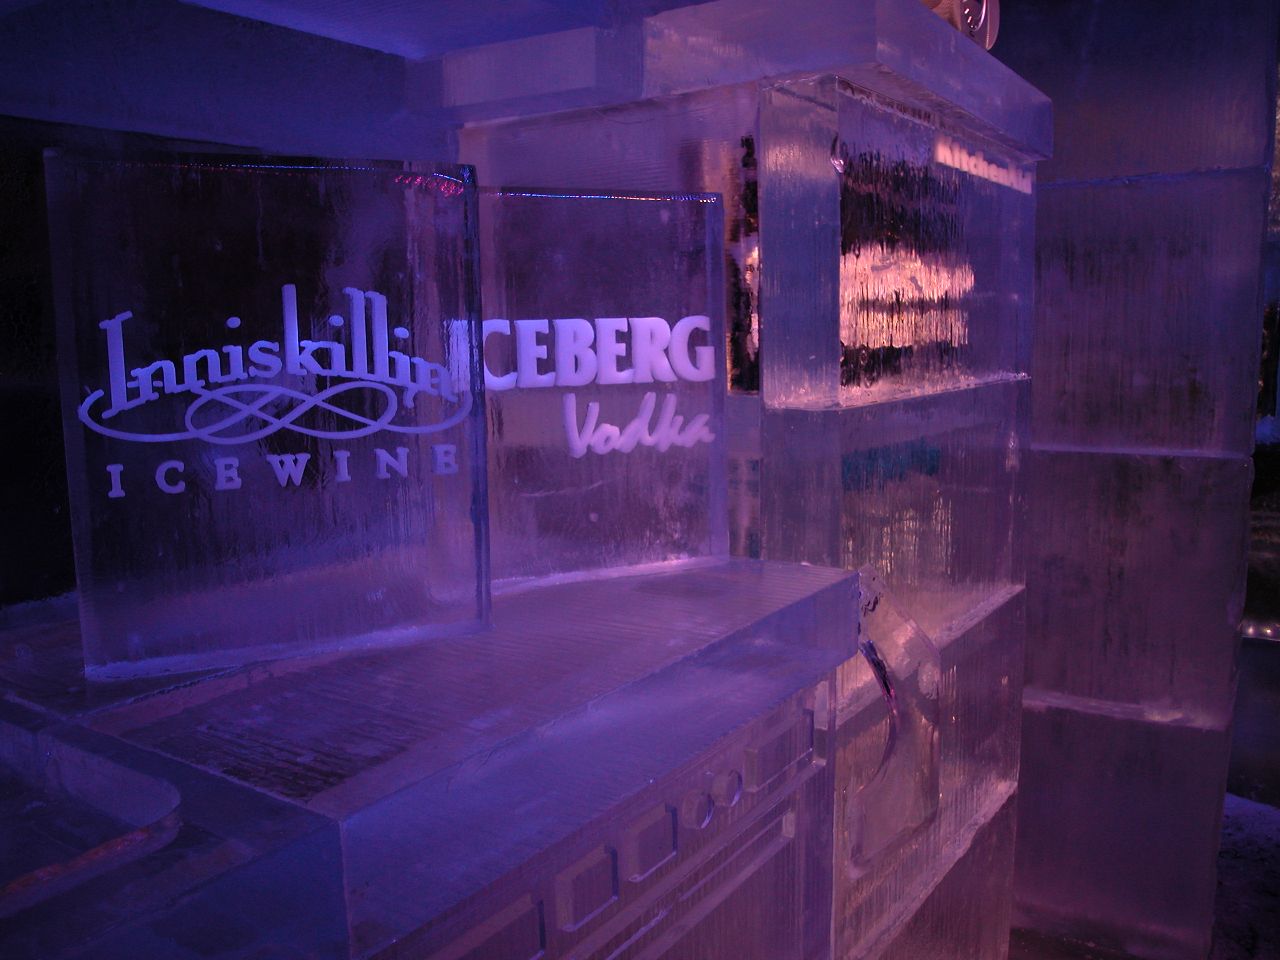 Inniskillin and Iceberg logos made out of Ice